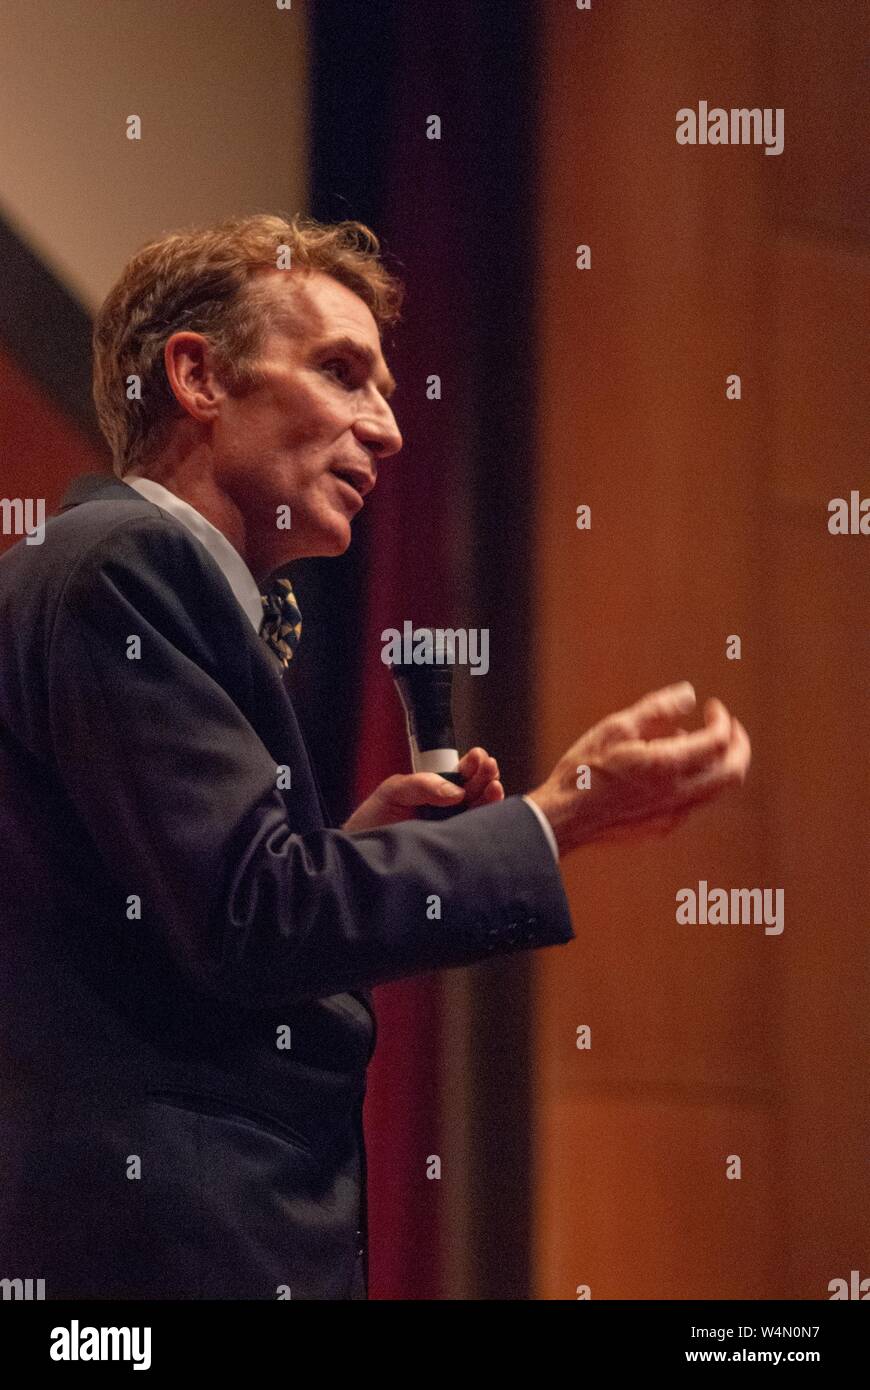 Low-angle profile shot of science communicator Bill Nye, speaking during a Milton S Eisenhower Symposium at the Johns Hopkins University, Baltimore, Maryland, October 23, 2007. From the Homewood Photography Collection. () Stock Photo